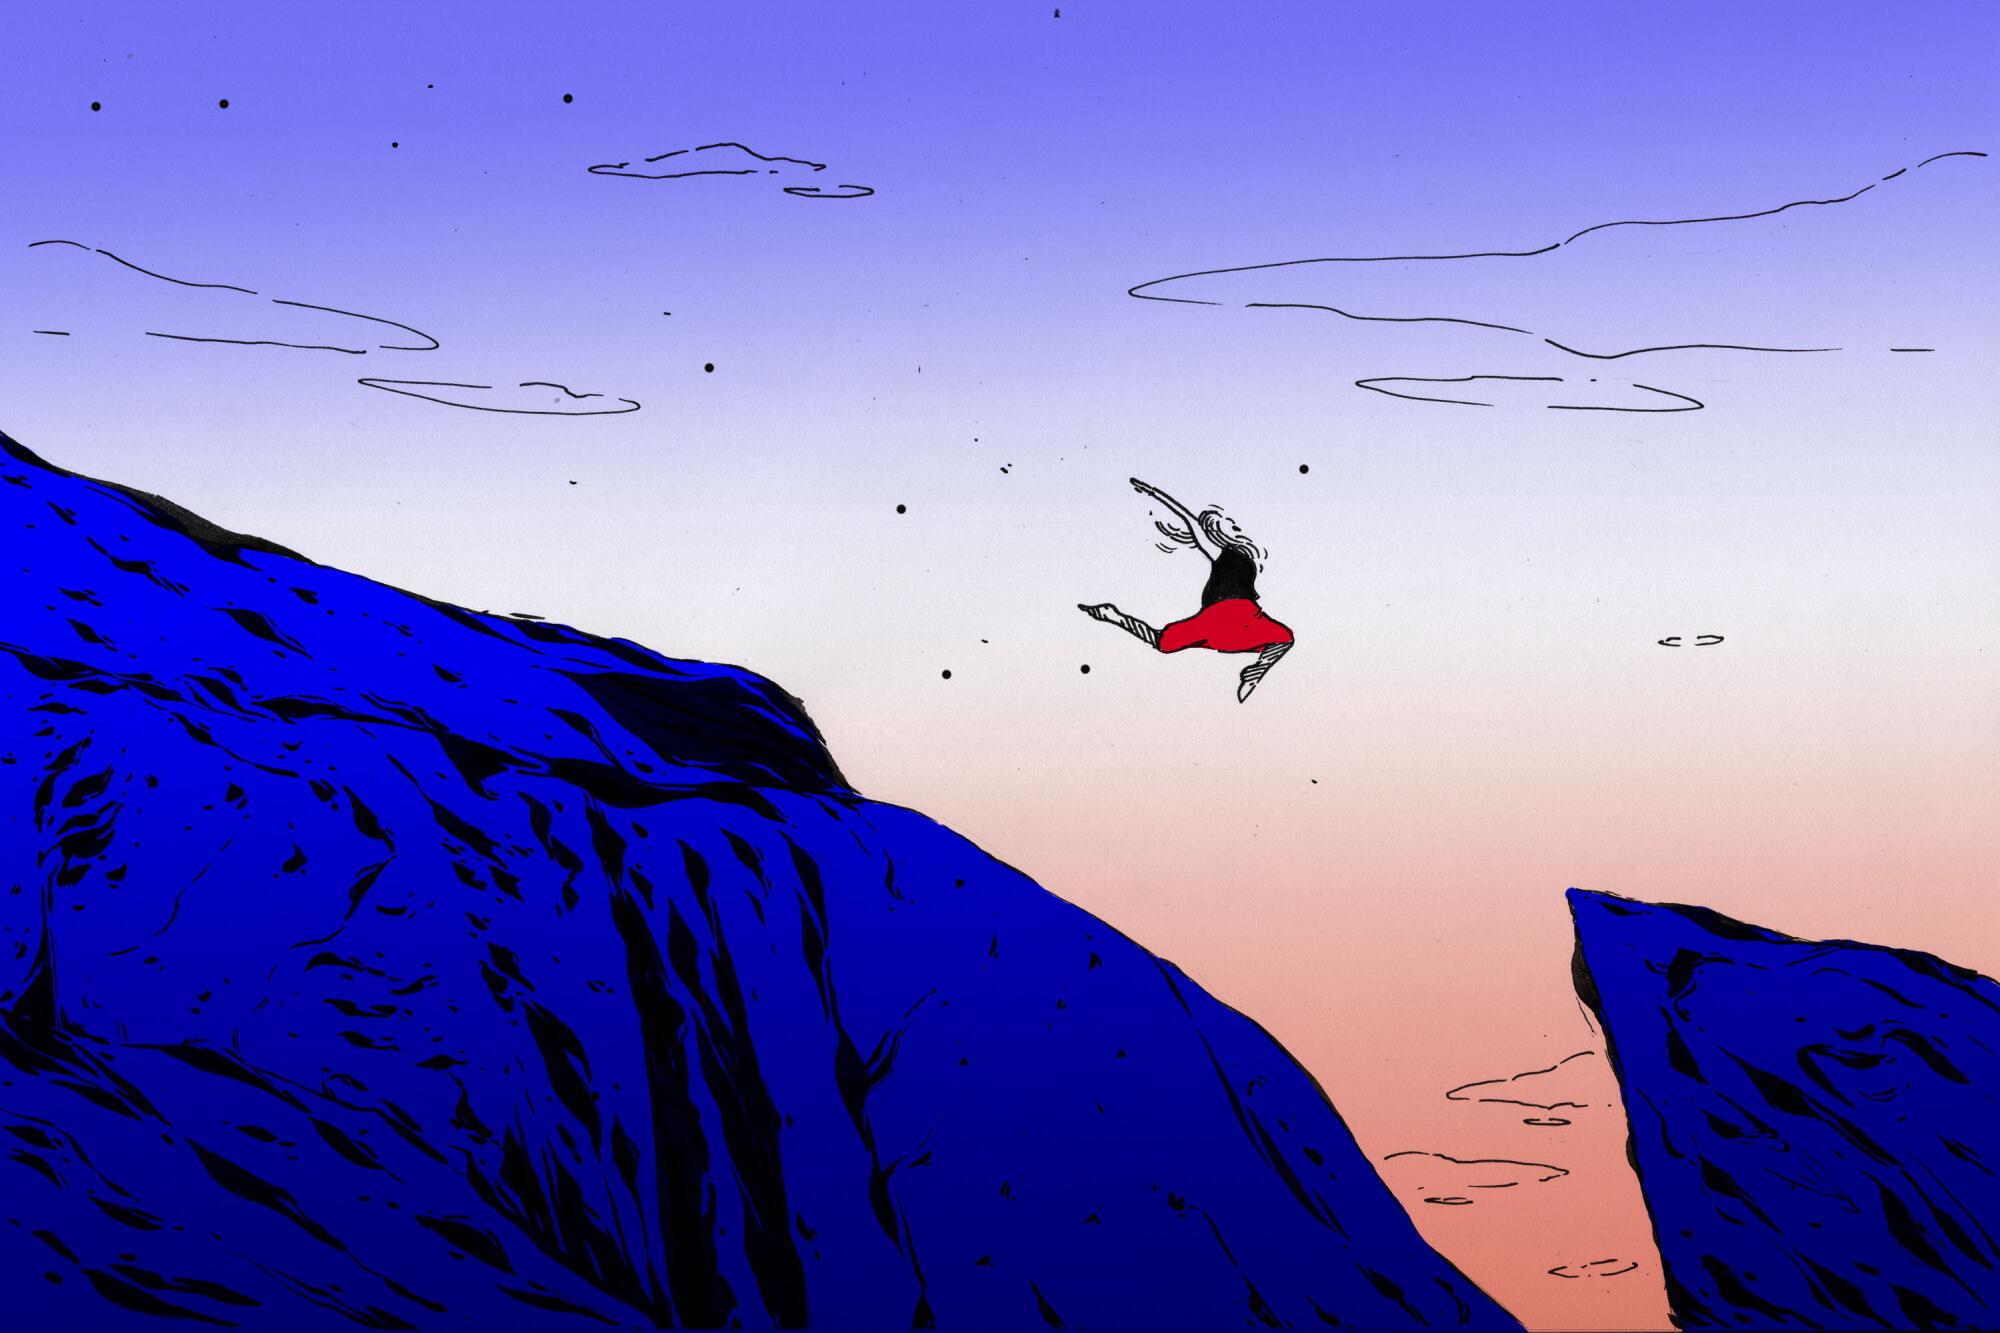 Illustration shows a person joyfully leaping over a chasm, taking a risk.